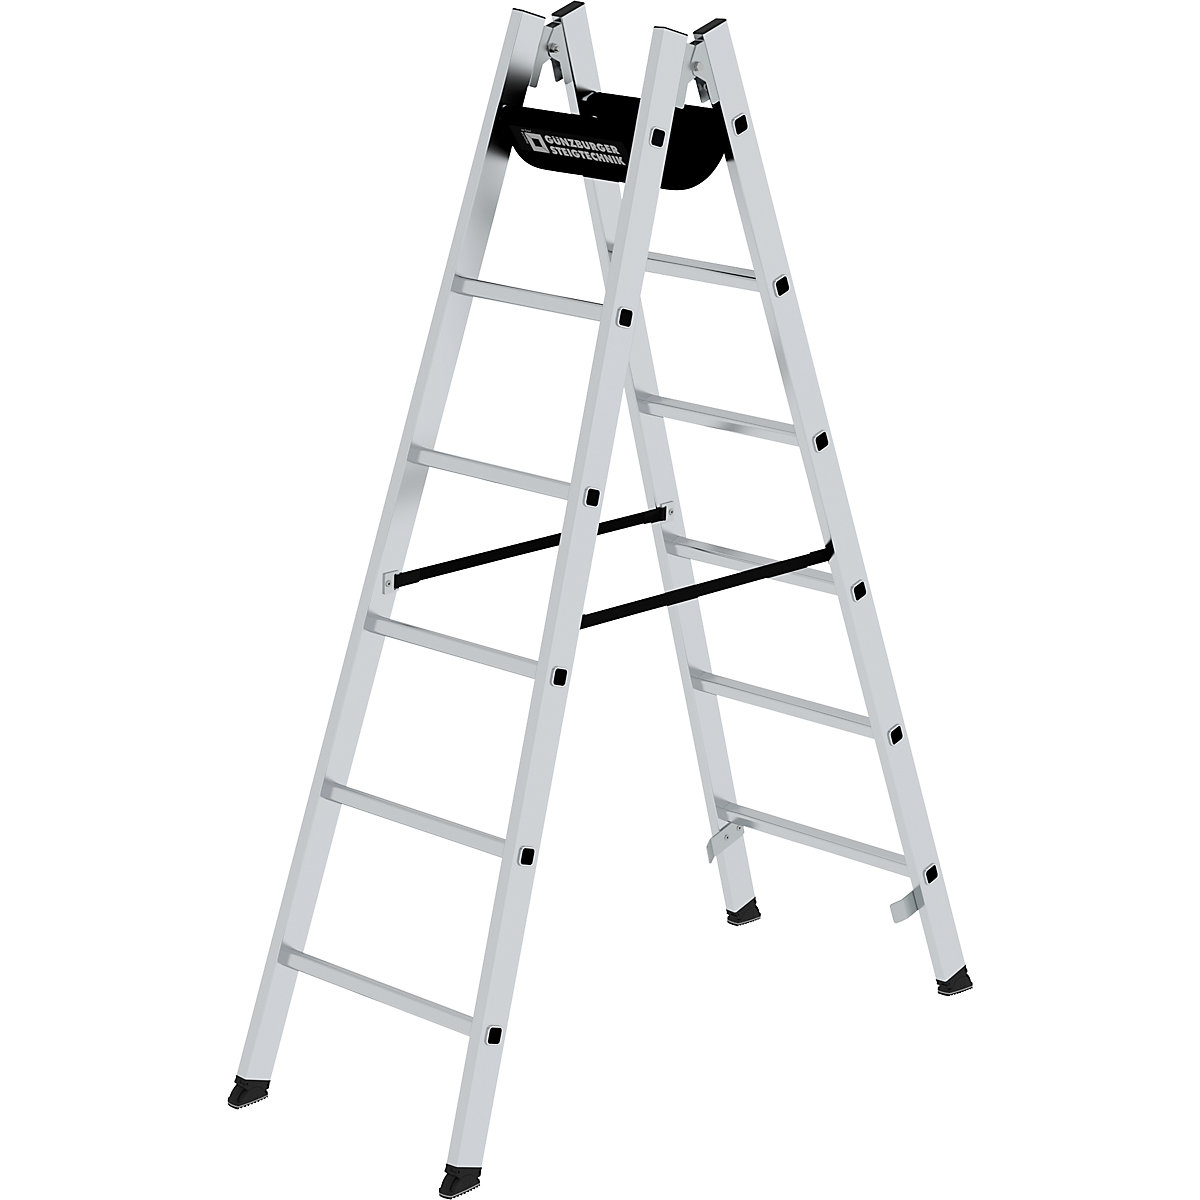 Safety rung ladder, double sided access – MUNK